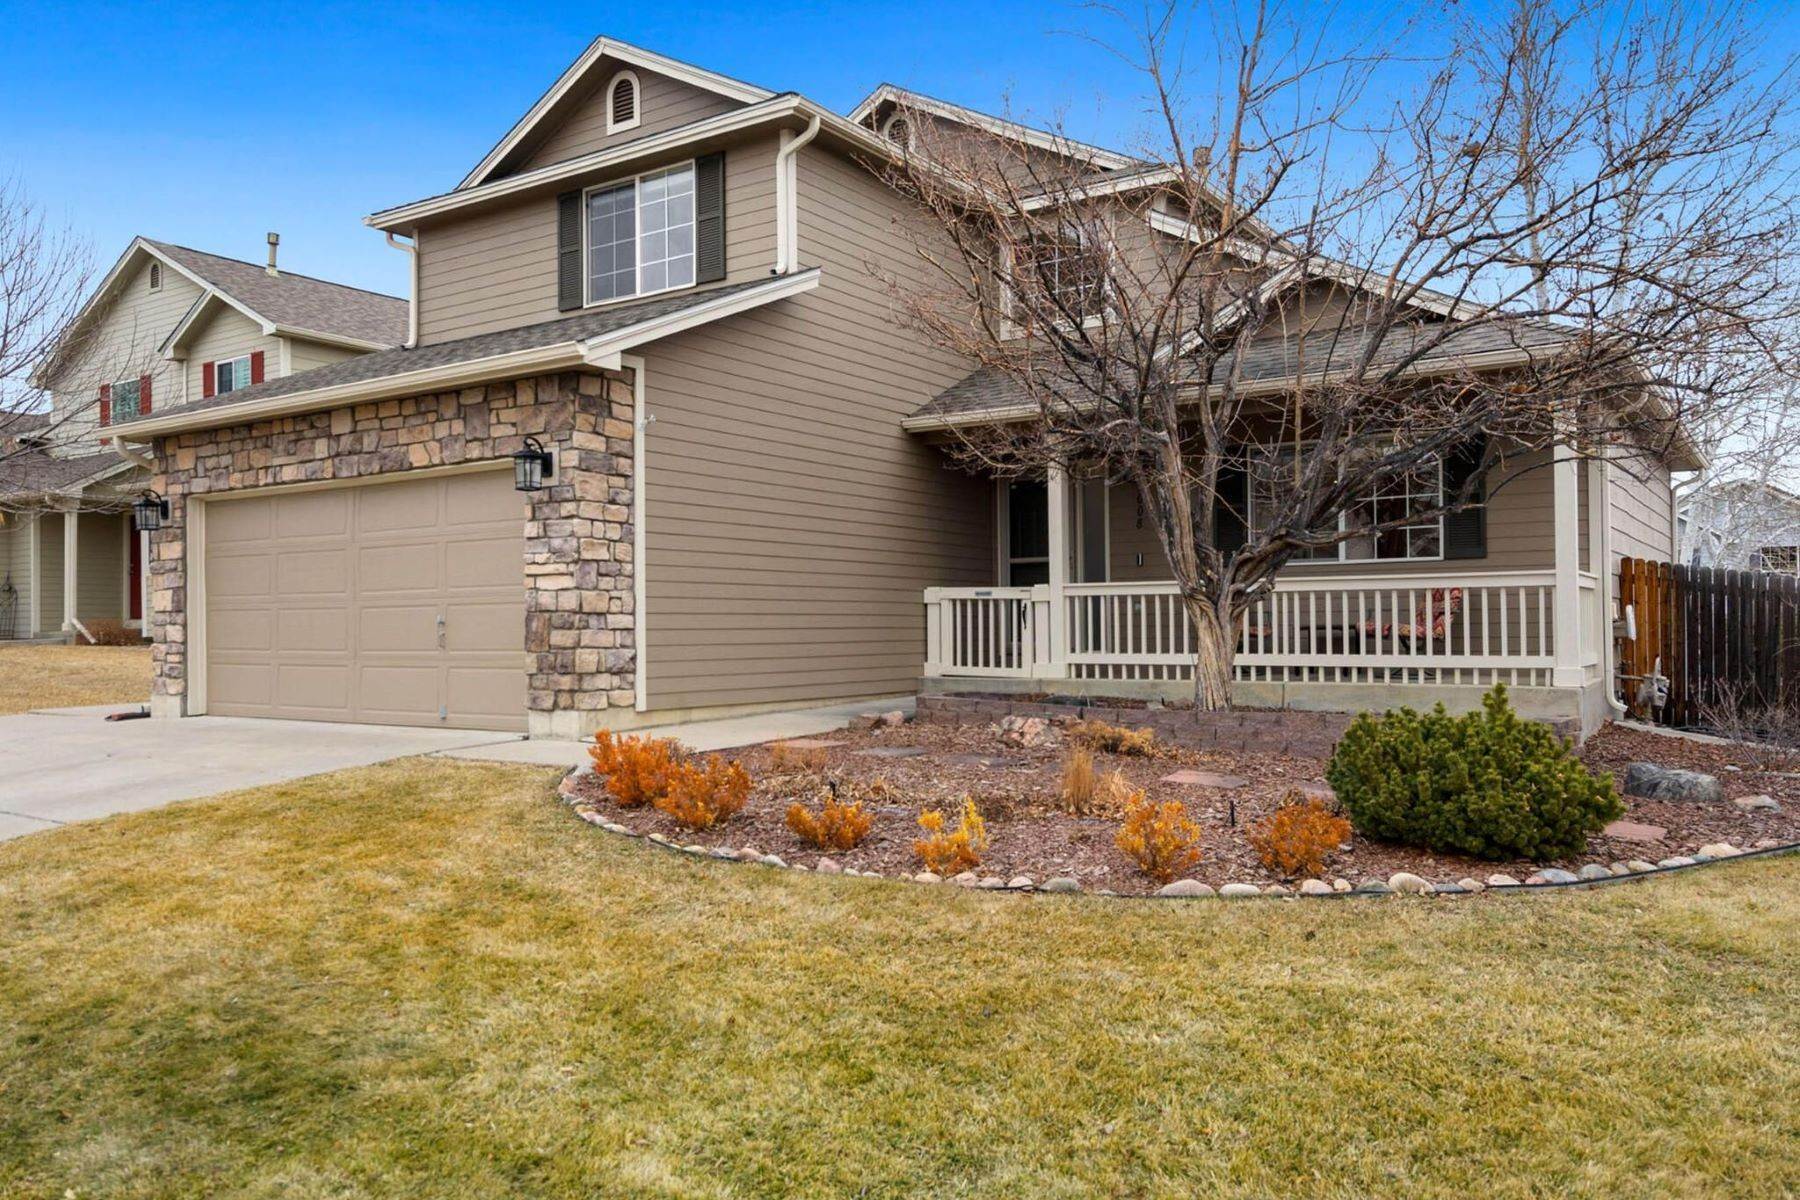 Single Family Homes for Sale at Beautiful Ridgewood Hills 2-story in model condition on a large, corner lot! 7008 Woodrow Drive Fort Collins, Colorado 80525 United States